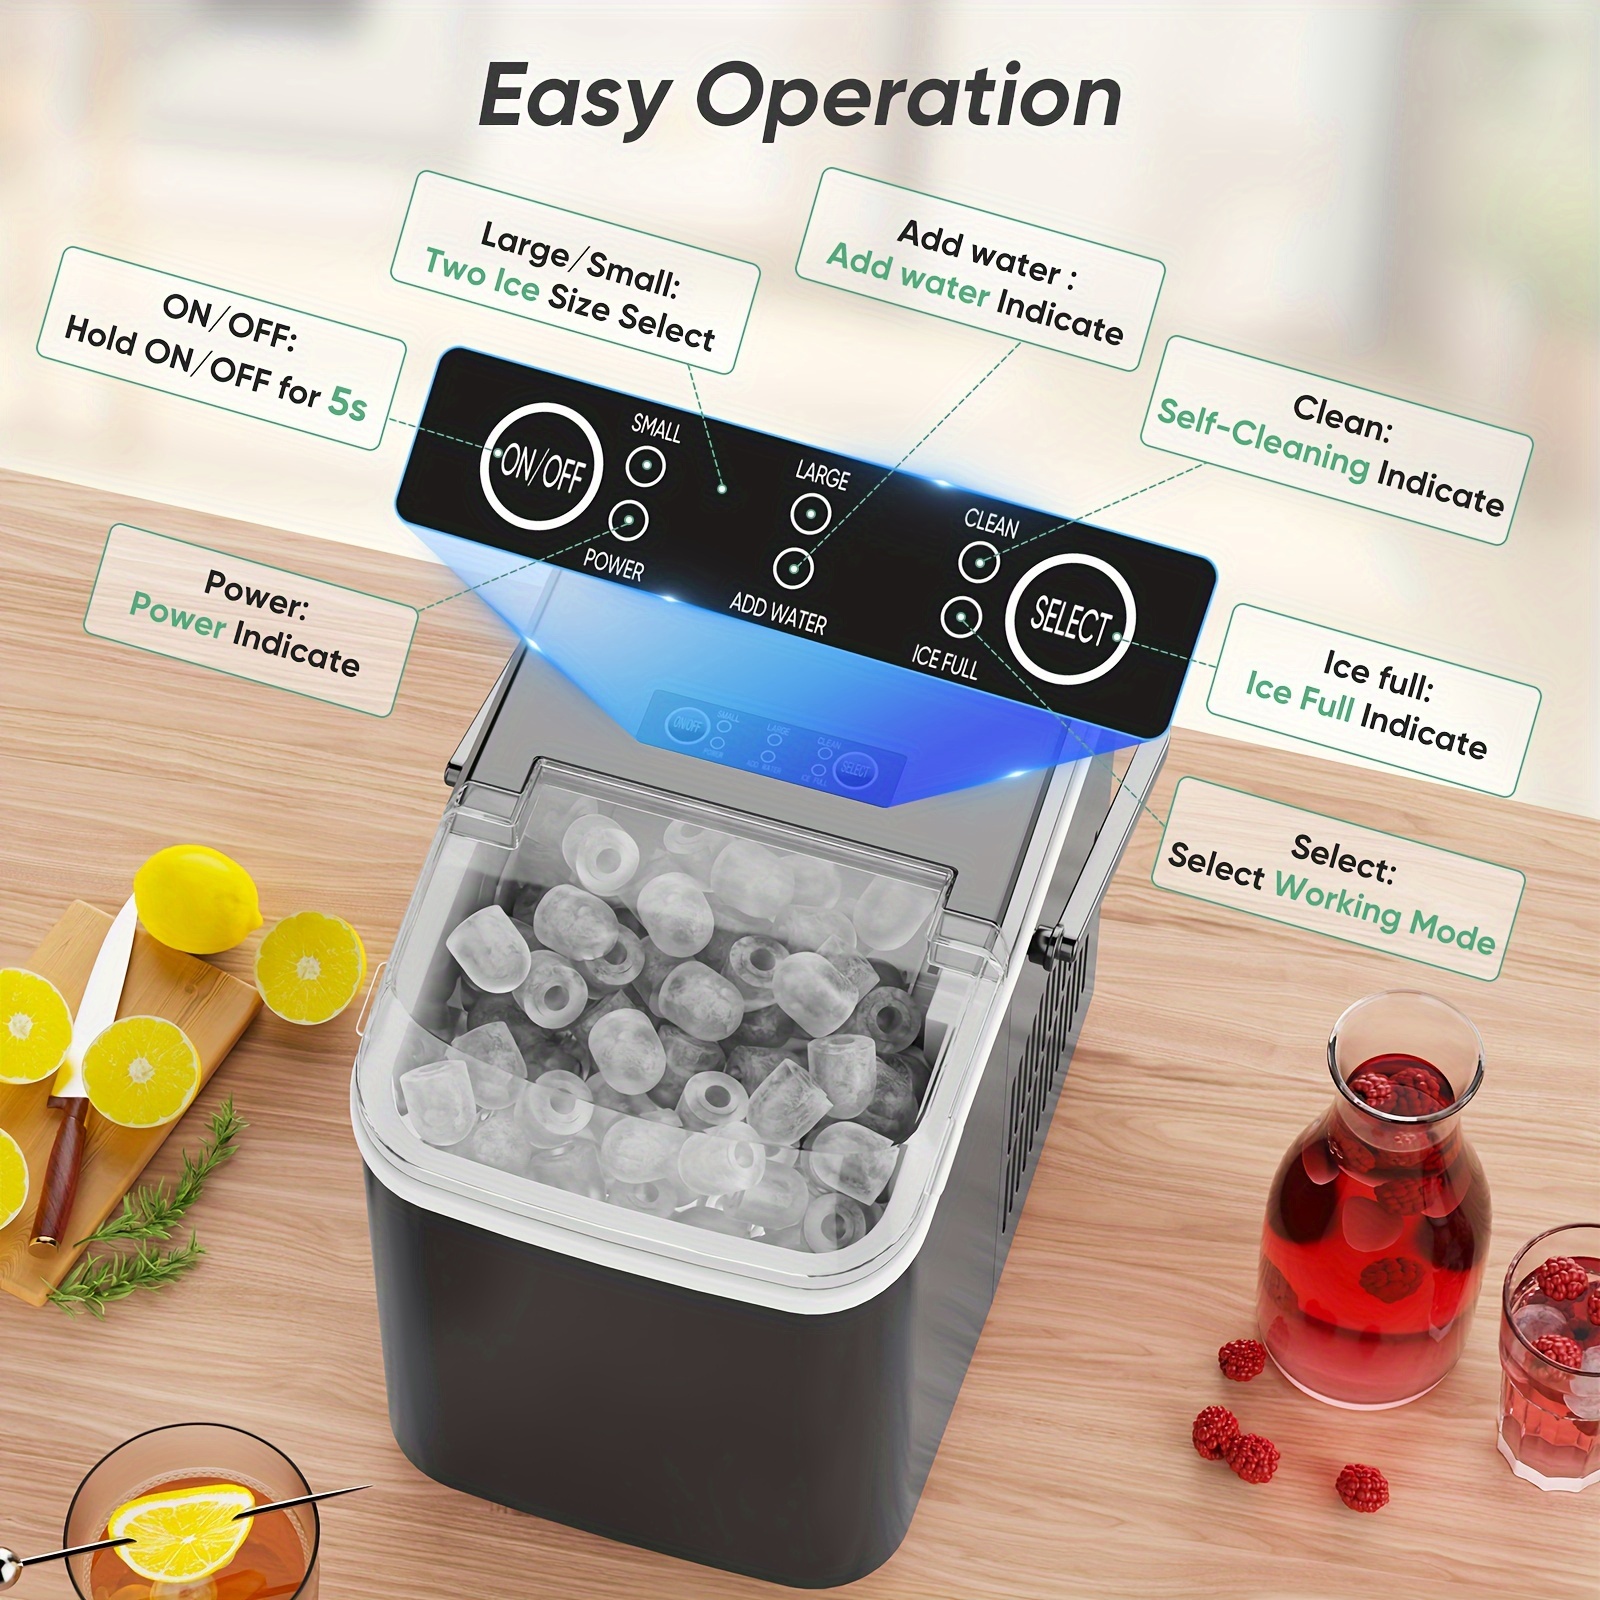 

Countertop Ice Maker, 9 Bullet Ice Cubes In 6 Mins, Nugget Portable Ice Machine, 26.5lbs In 24hrs Self-cleaning With Handle, Basket, Scoop For Home, Kitchen/party/camping/rv